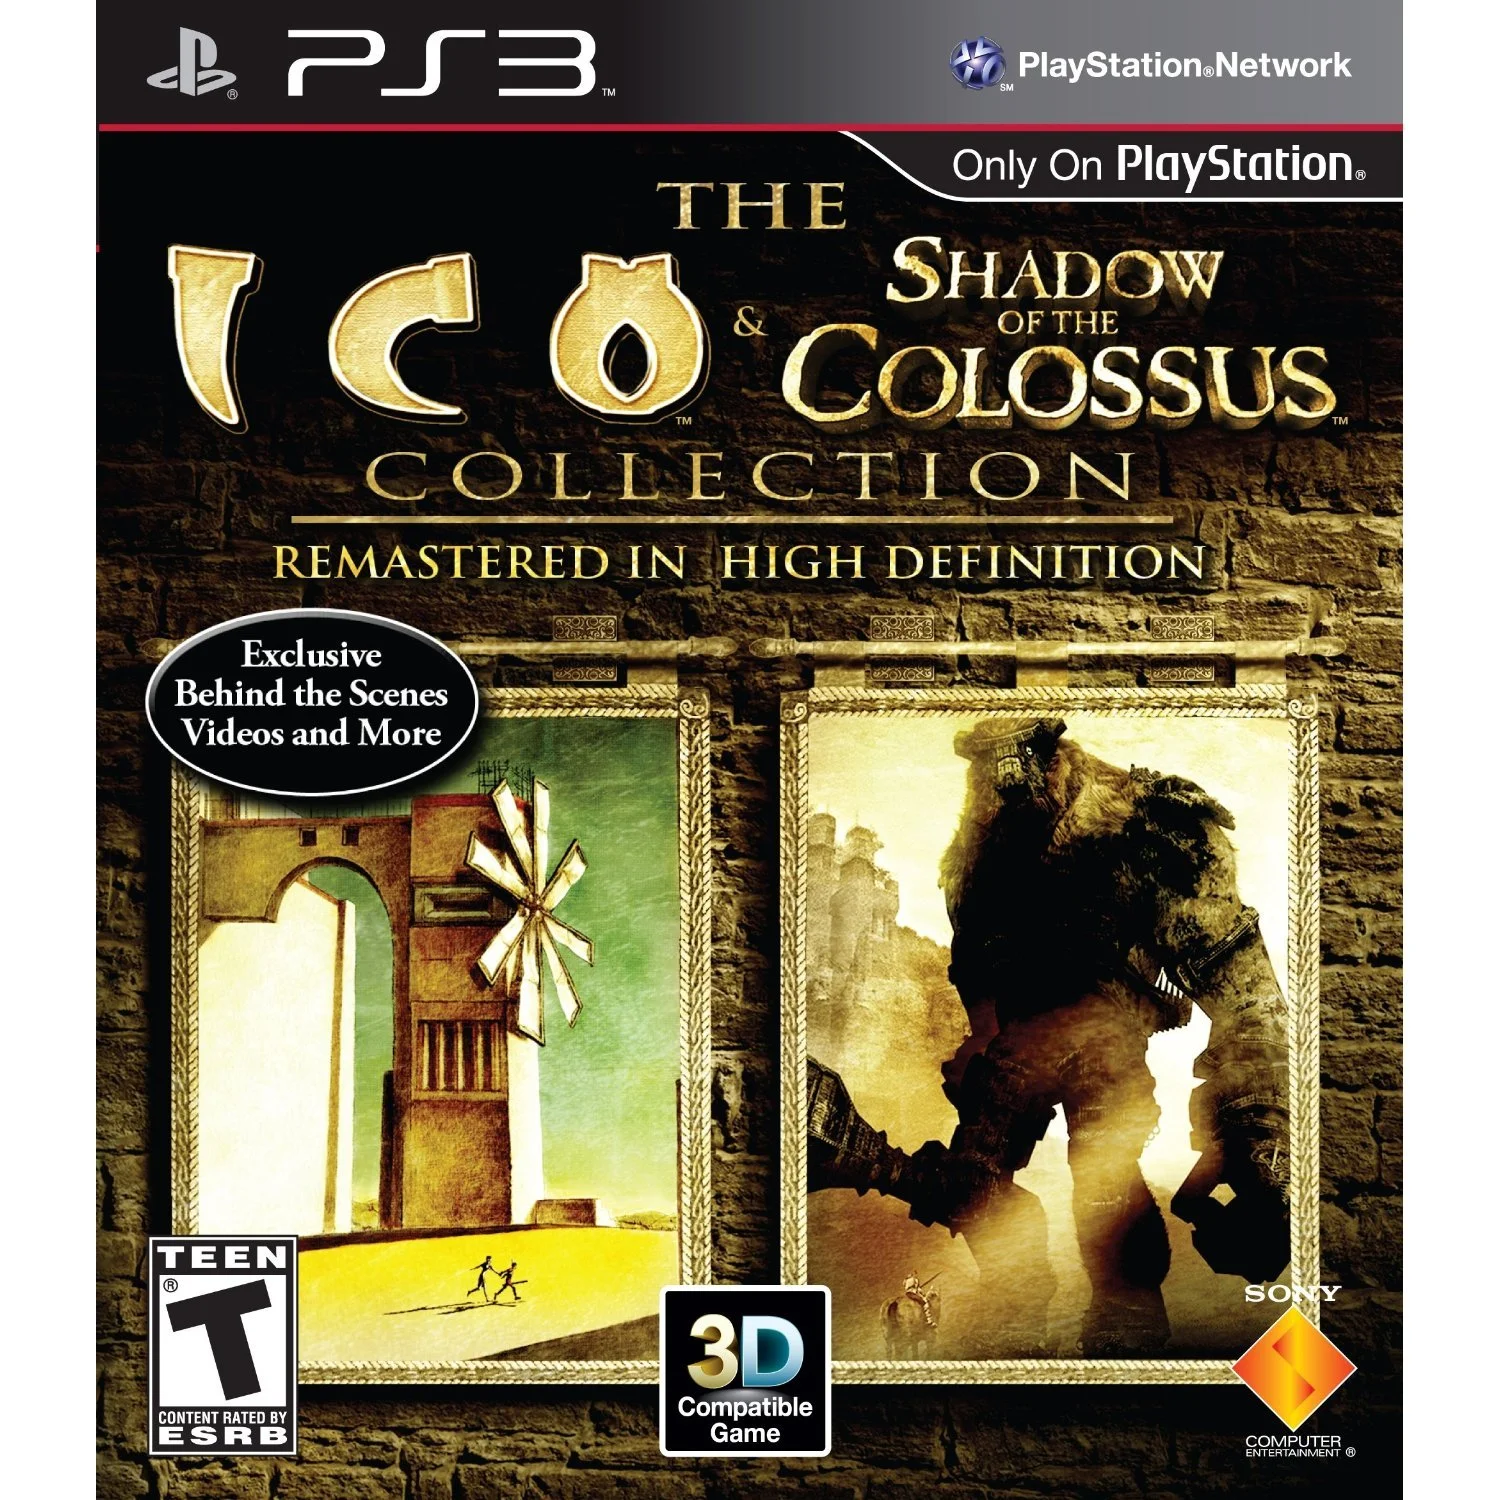 Ico and Shadow of the Colossus: The Collection